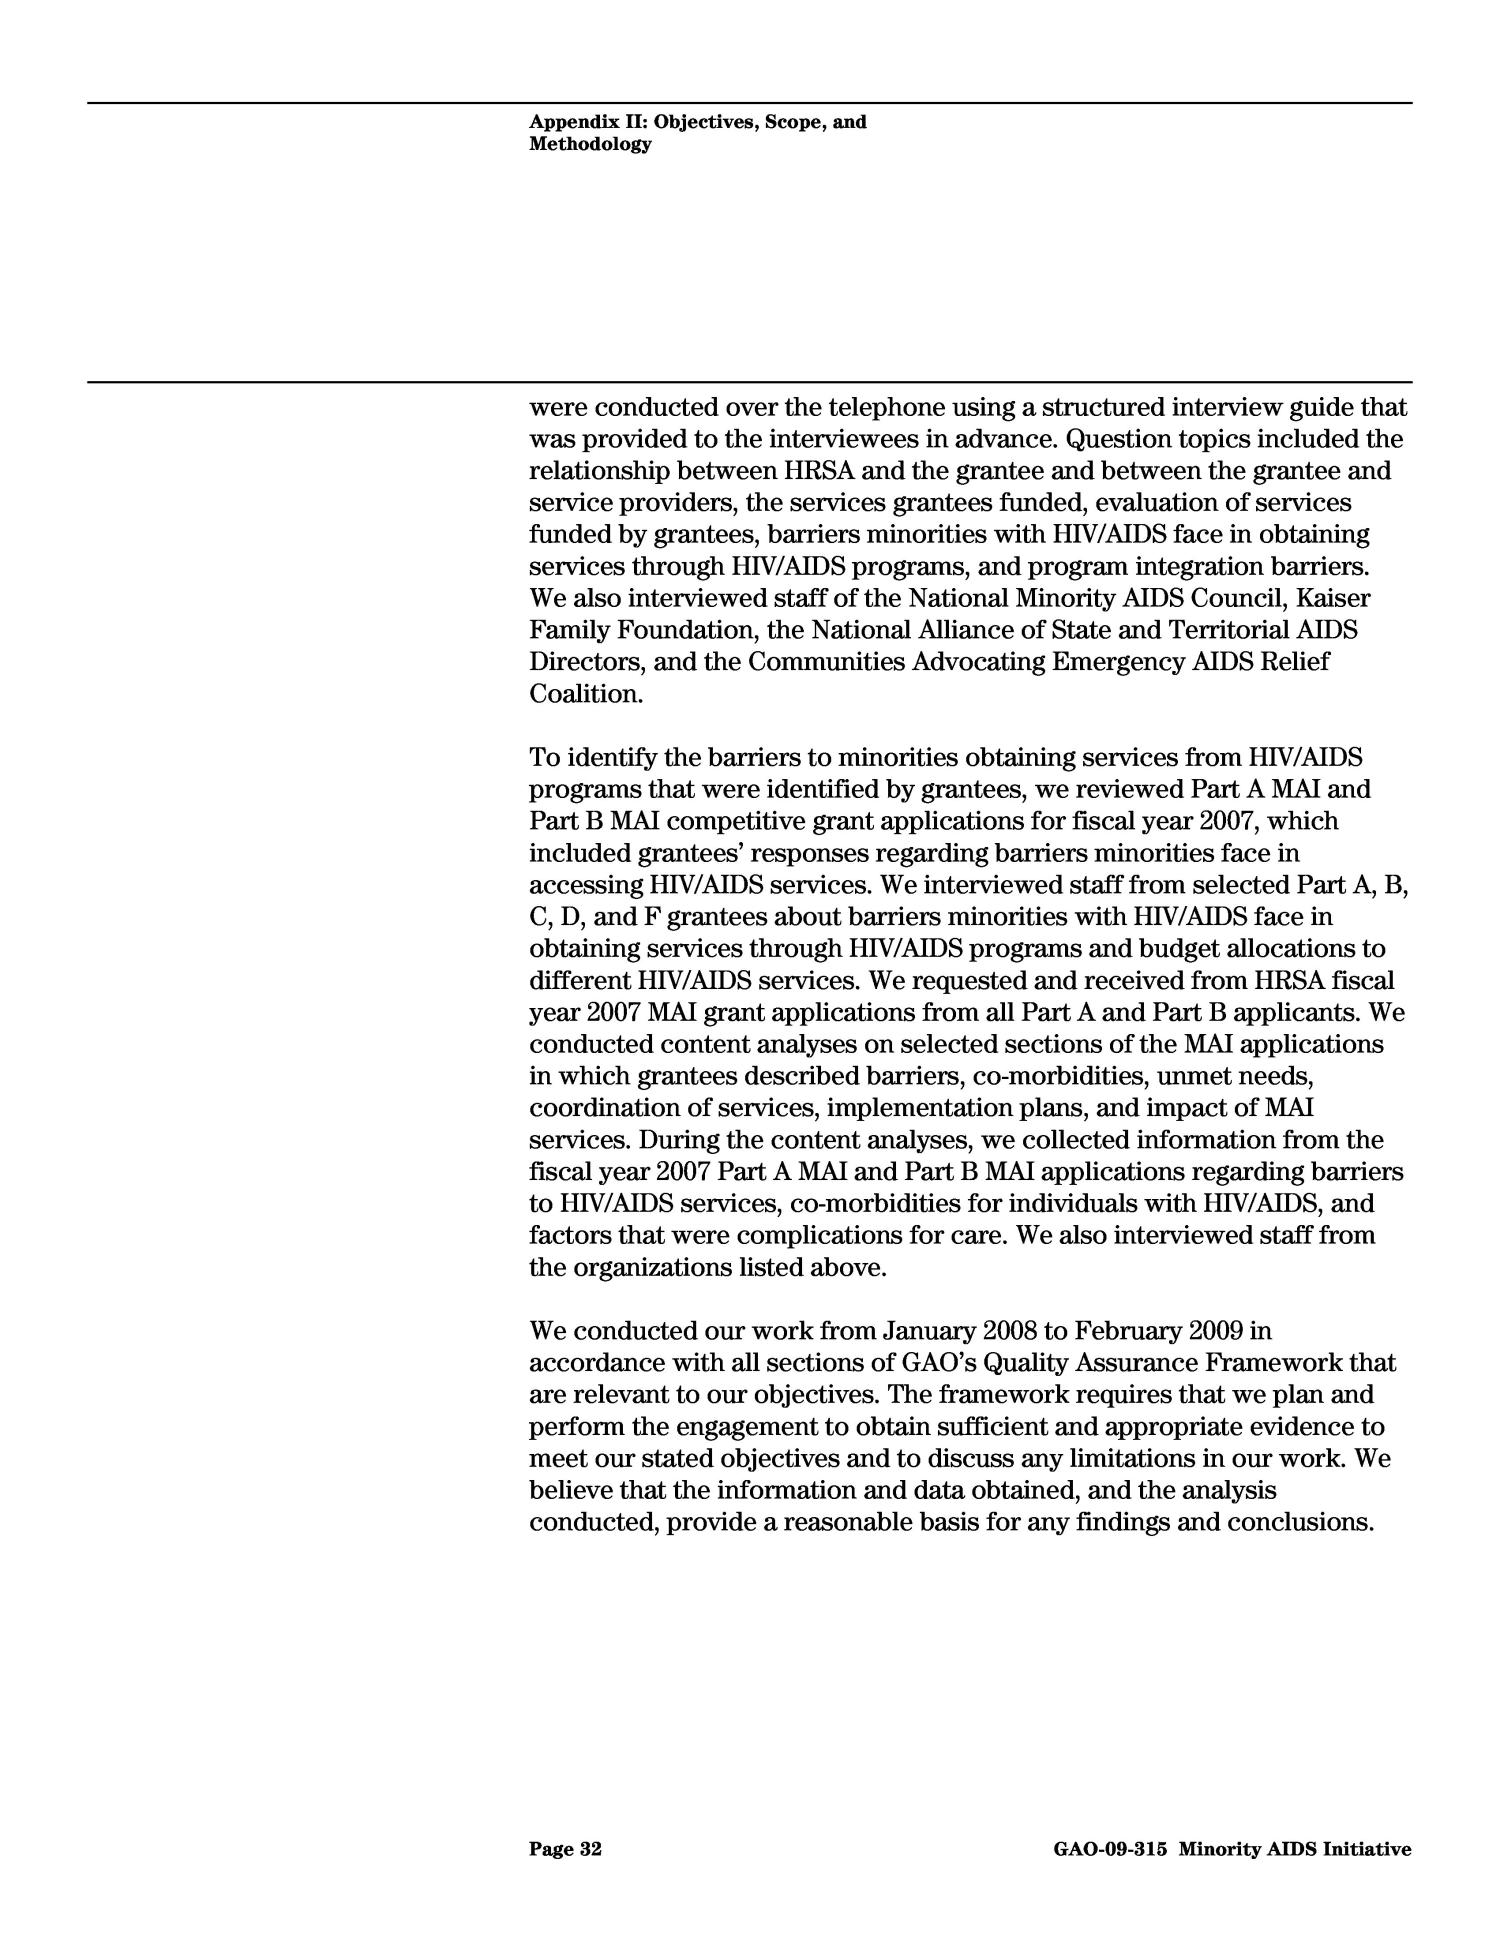 Ryan White CARE Act: Implementation of the New Minority AIDS Initiative Provisions
                                                
                                                    [Sequence #]: 37 of 57
                                                